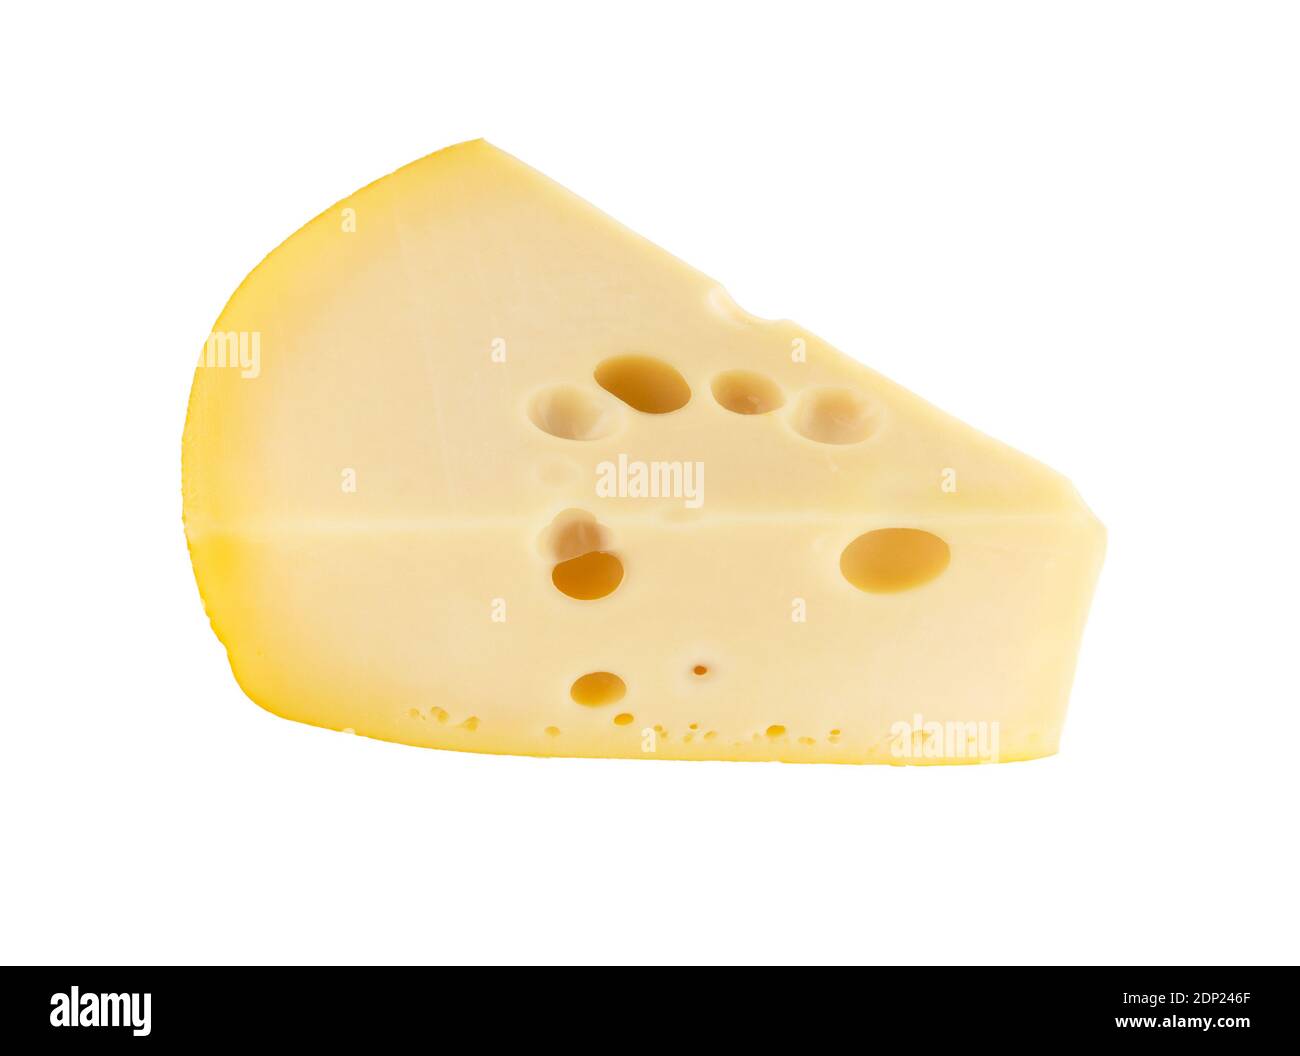 Cheese cut out. Piece of cheese isolated on white background. Stock Photo